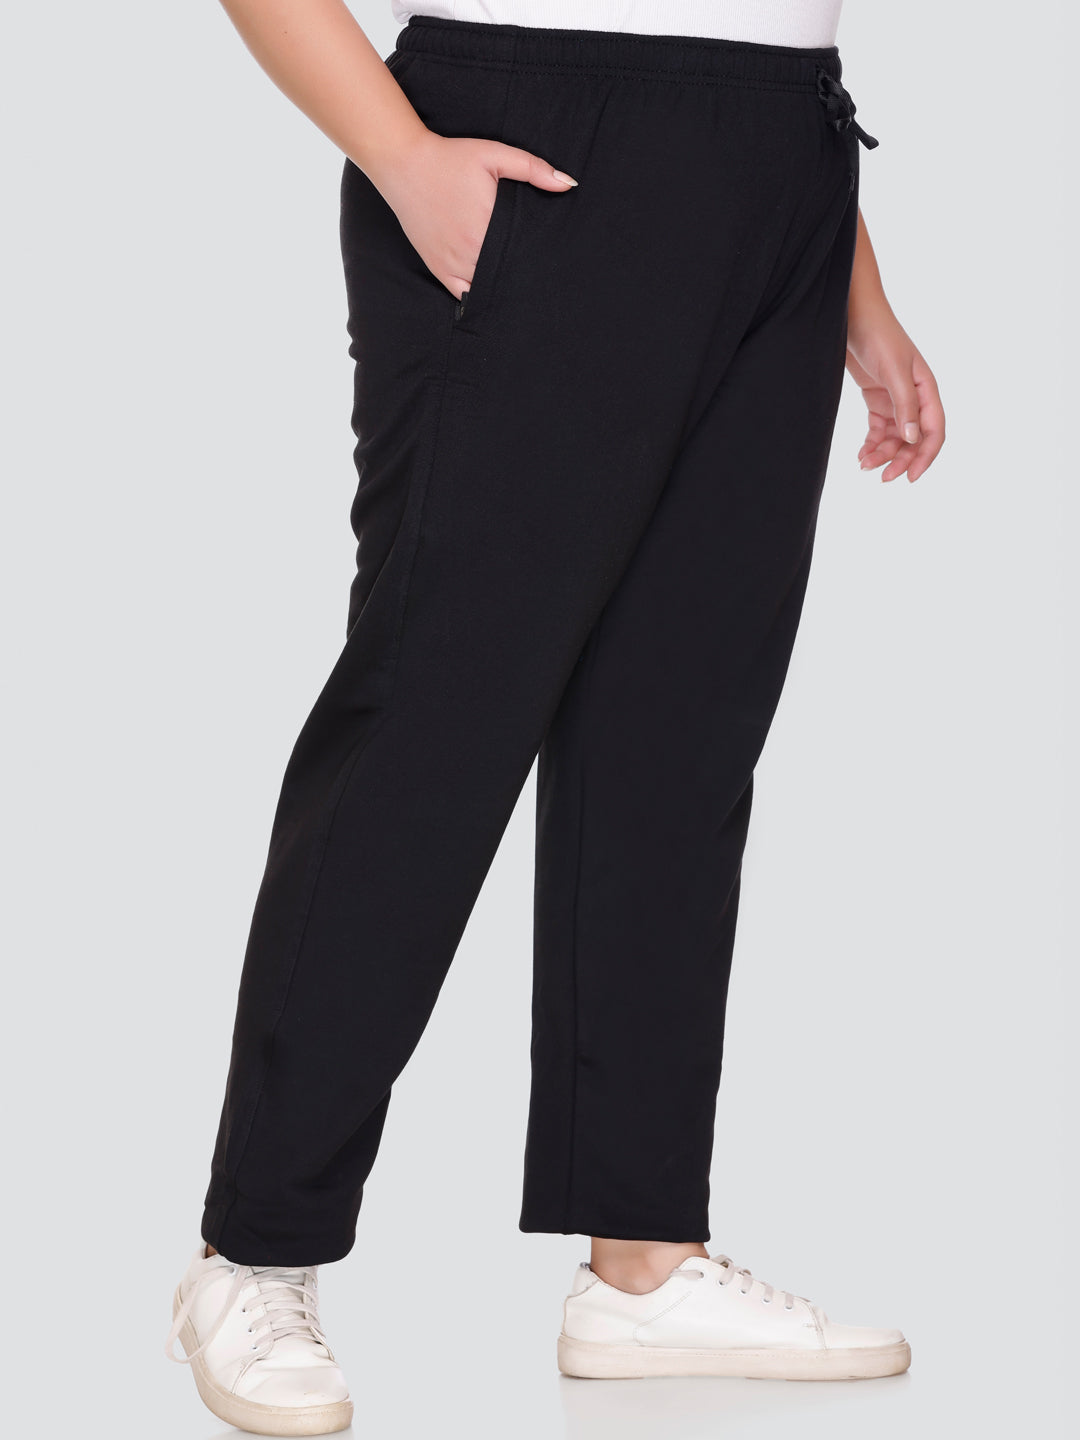 Buy Rosatro Womens Track Pants Ladies High Waist Plus Size with Belt  Trousers Sports Straight Loose Fit Leg Bottoms Pants (Black,XXL) at  Amazon.in